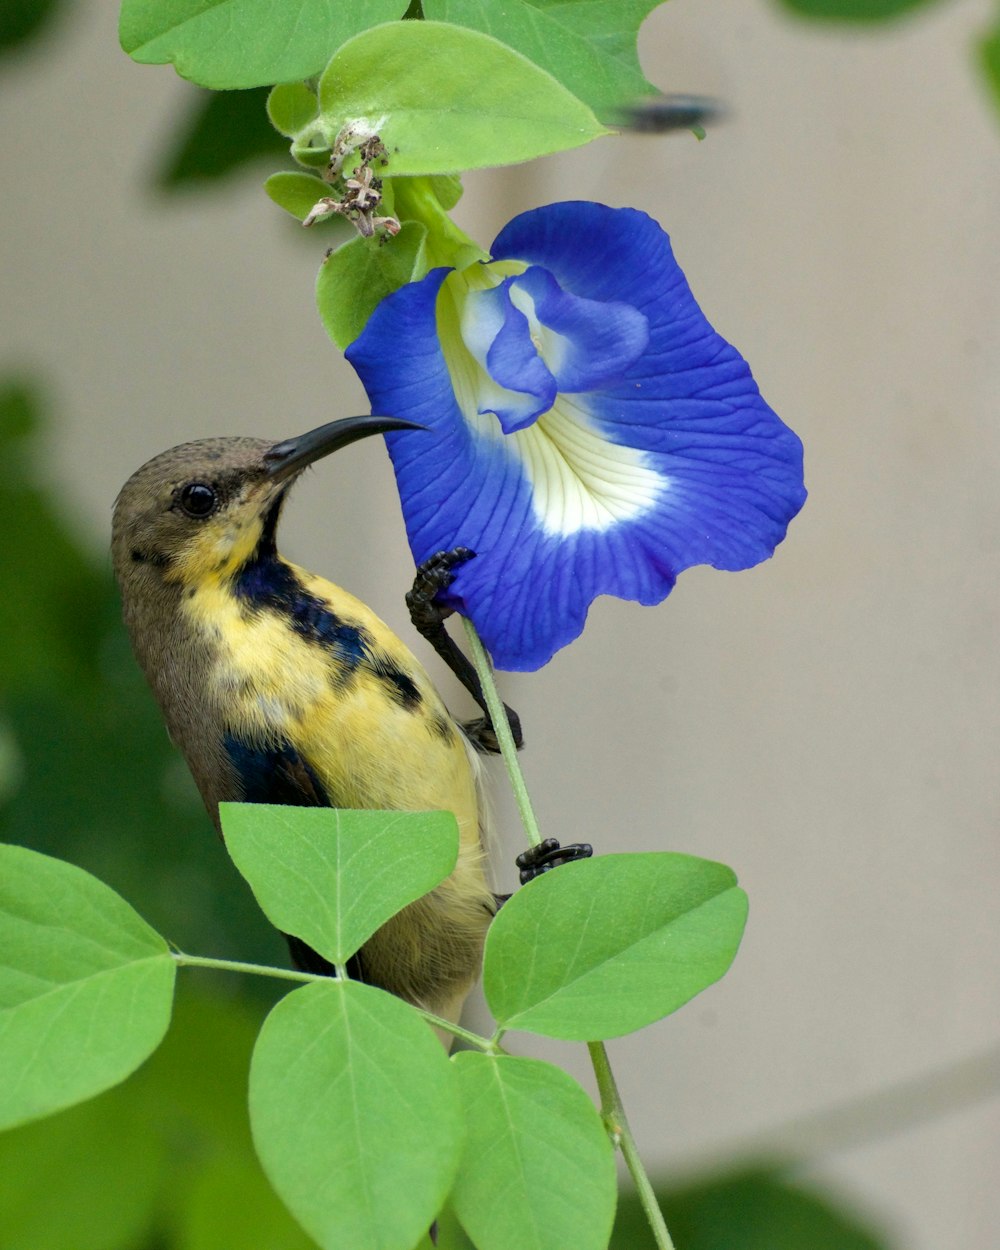 a bird is perched on a branch with a flower